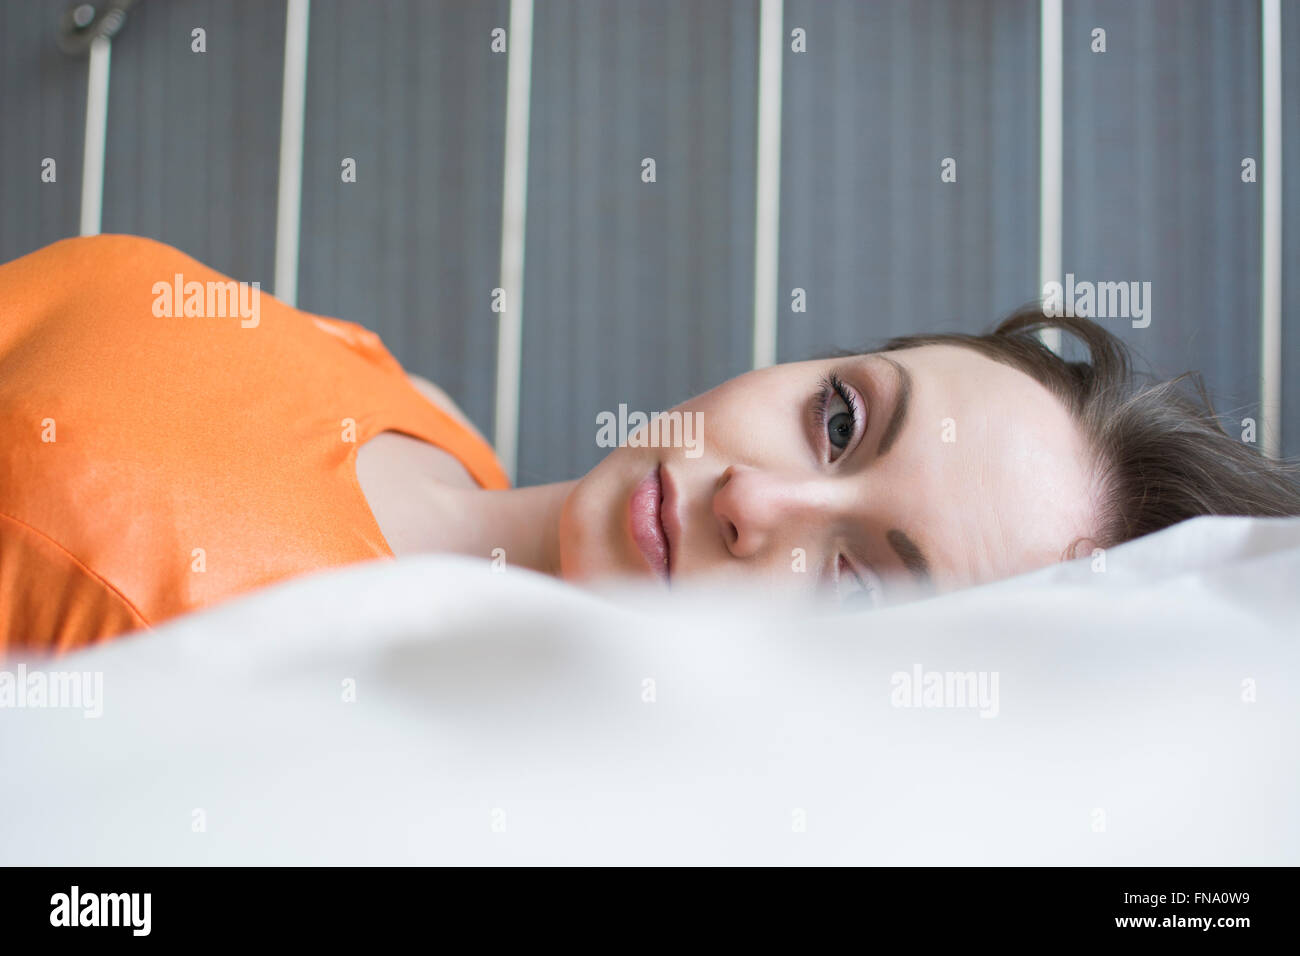 Young woman in bed alone Stock Photo